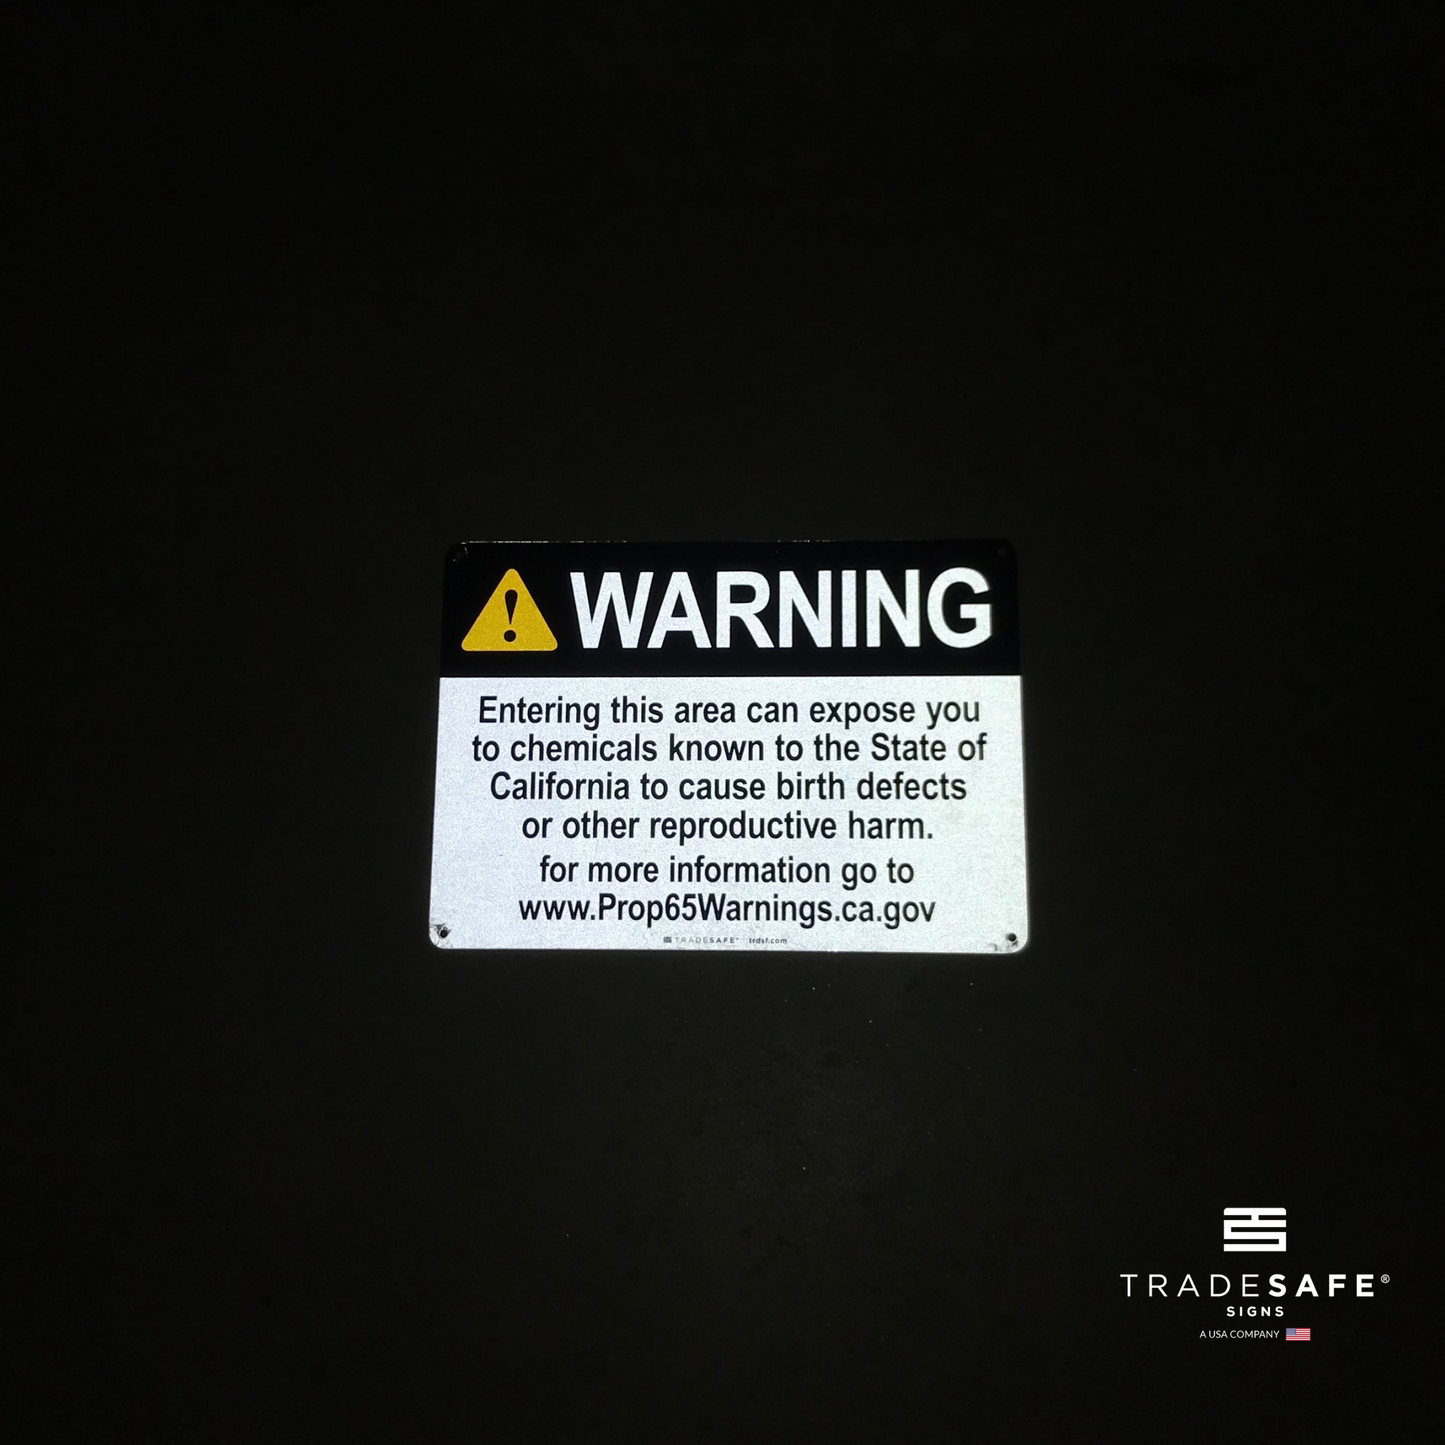 reflective attribute of warning sign on black background